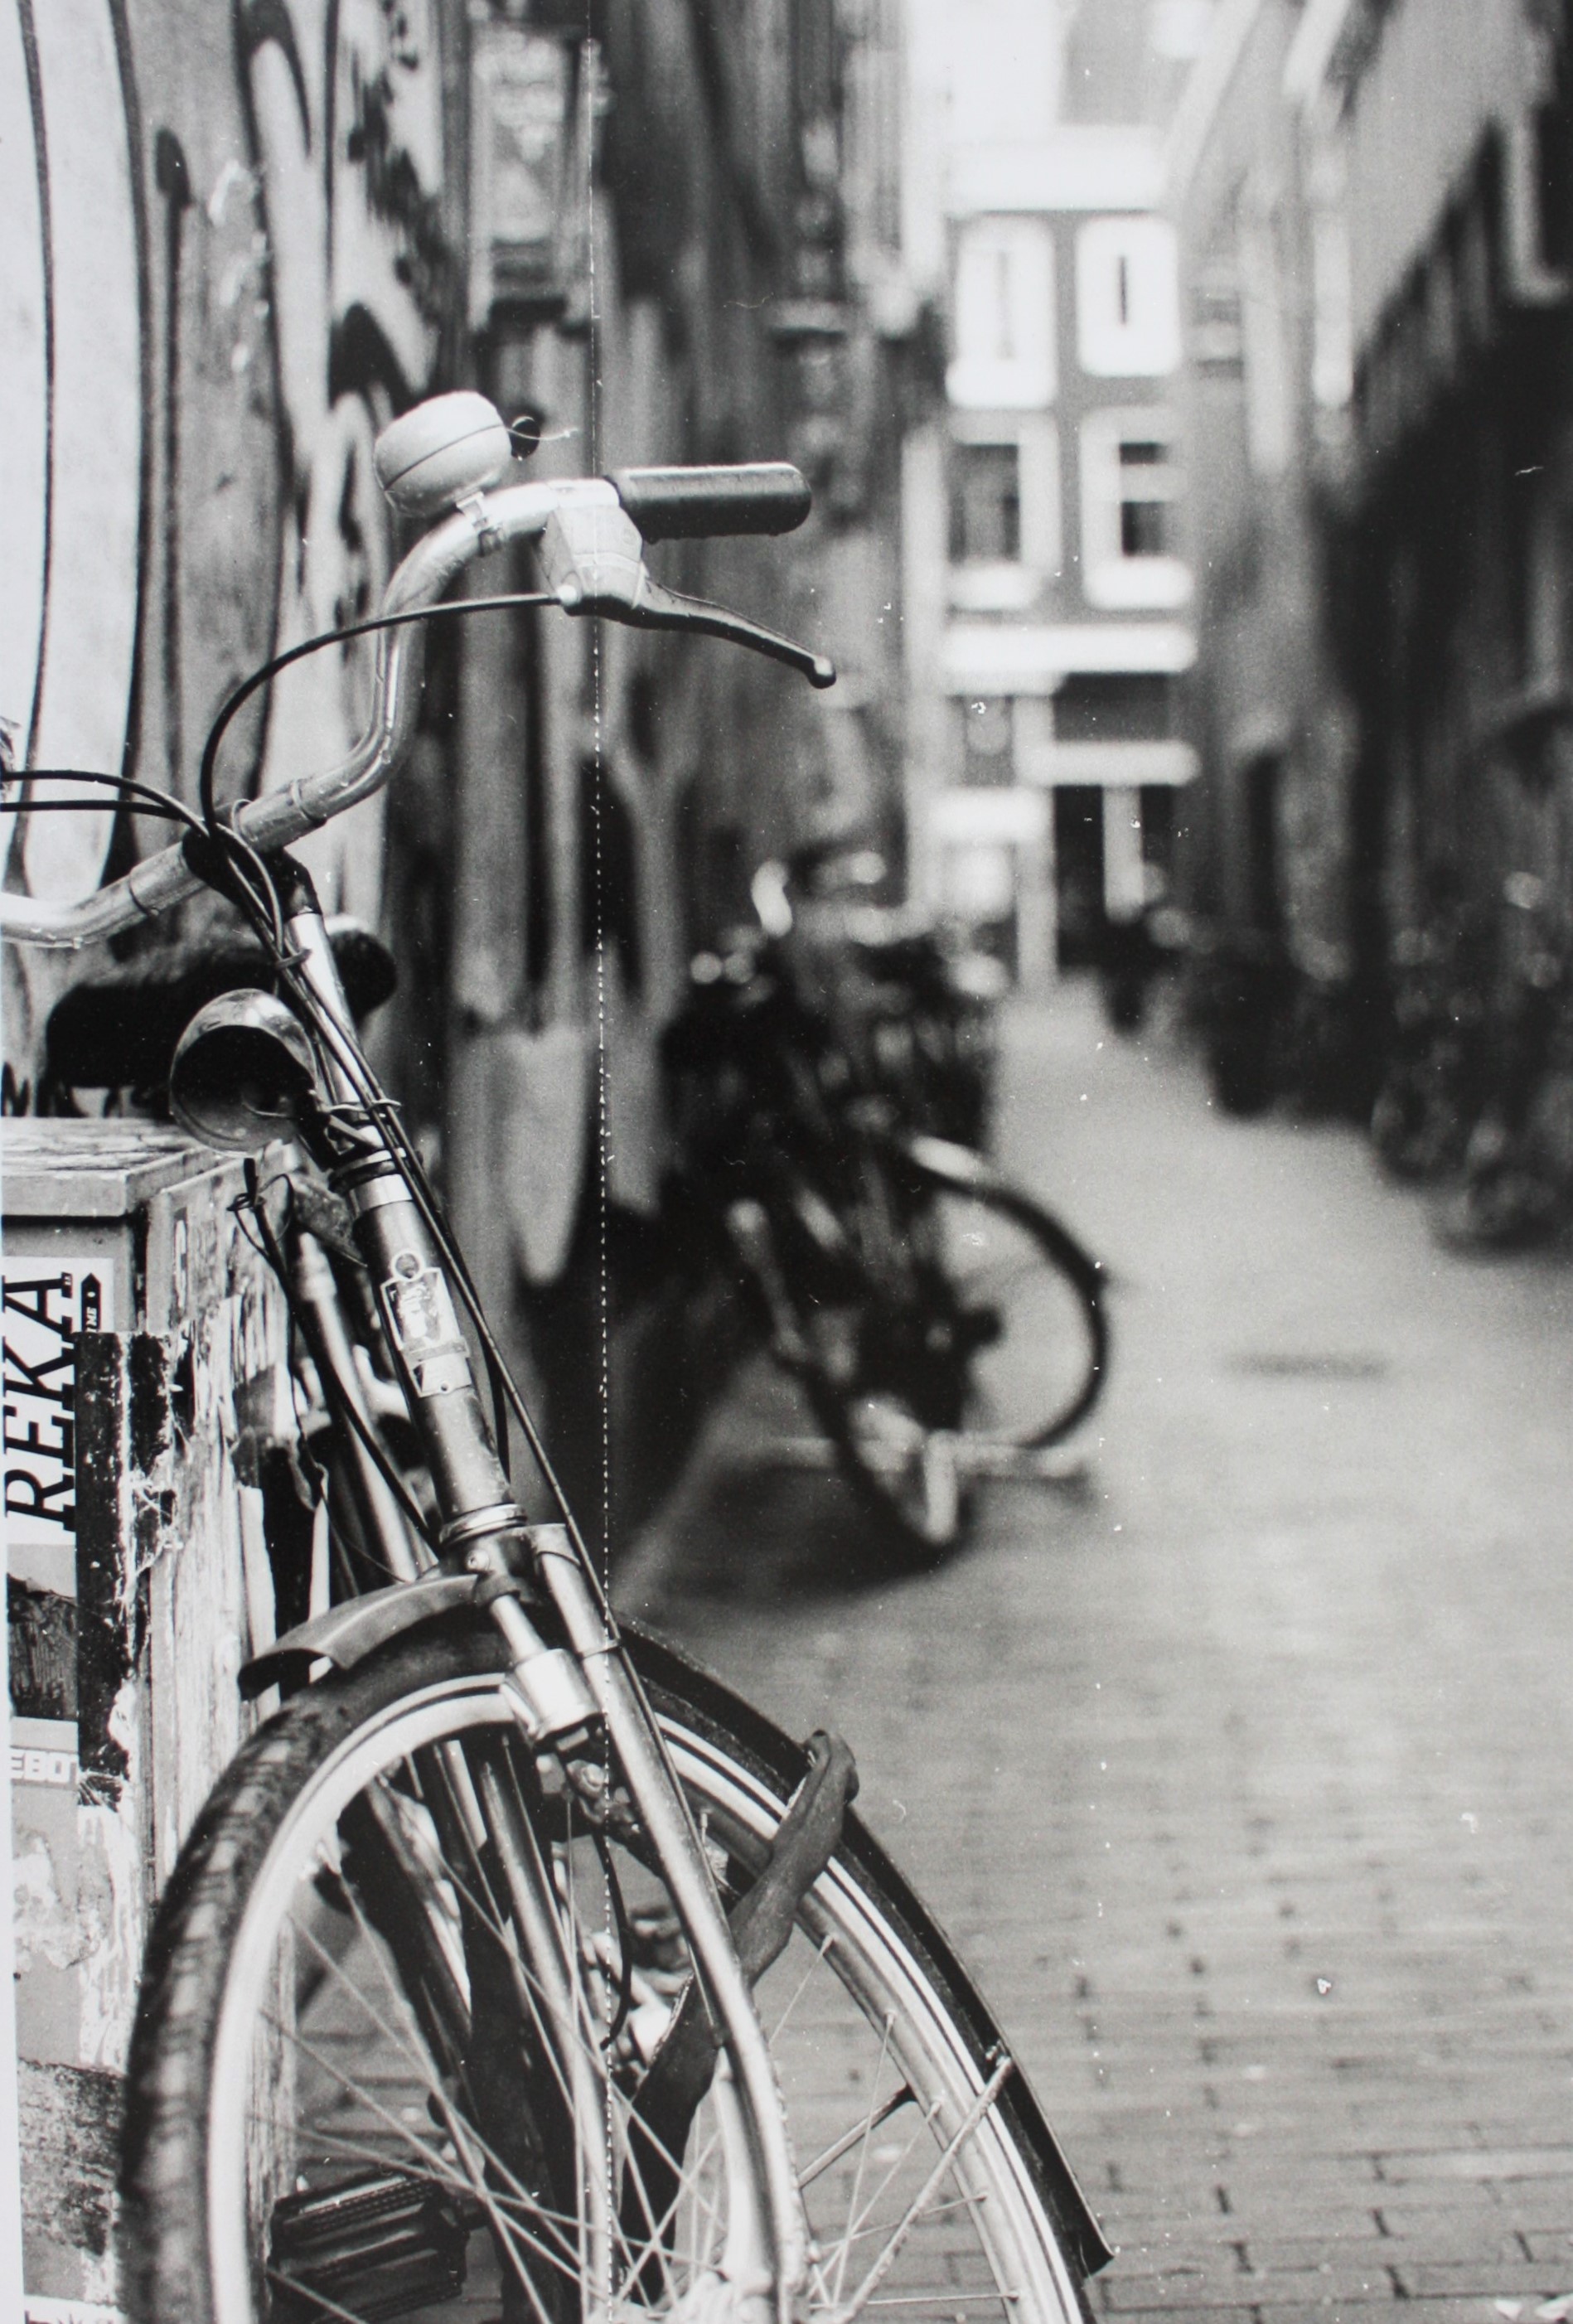 Third Prize (selected by votes at Business Admin display): This photo (called “Amsterdam" ) was taken in Amsterdam, down an alley in the Bloemenmarkt (the flower market) with my film camera. I developed the film and enlarged the image myself. Photo submitted by Madison Pascal, student who participated in a semester abroad in Sunderland, England.